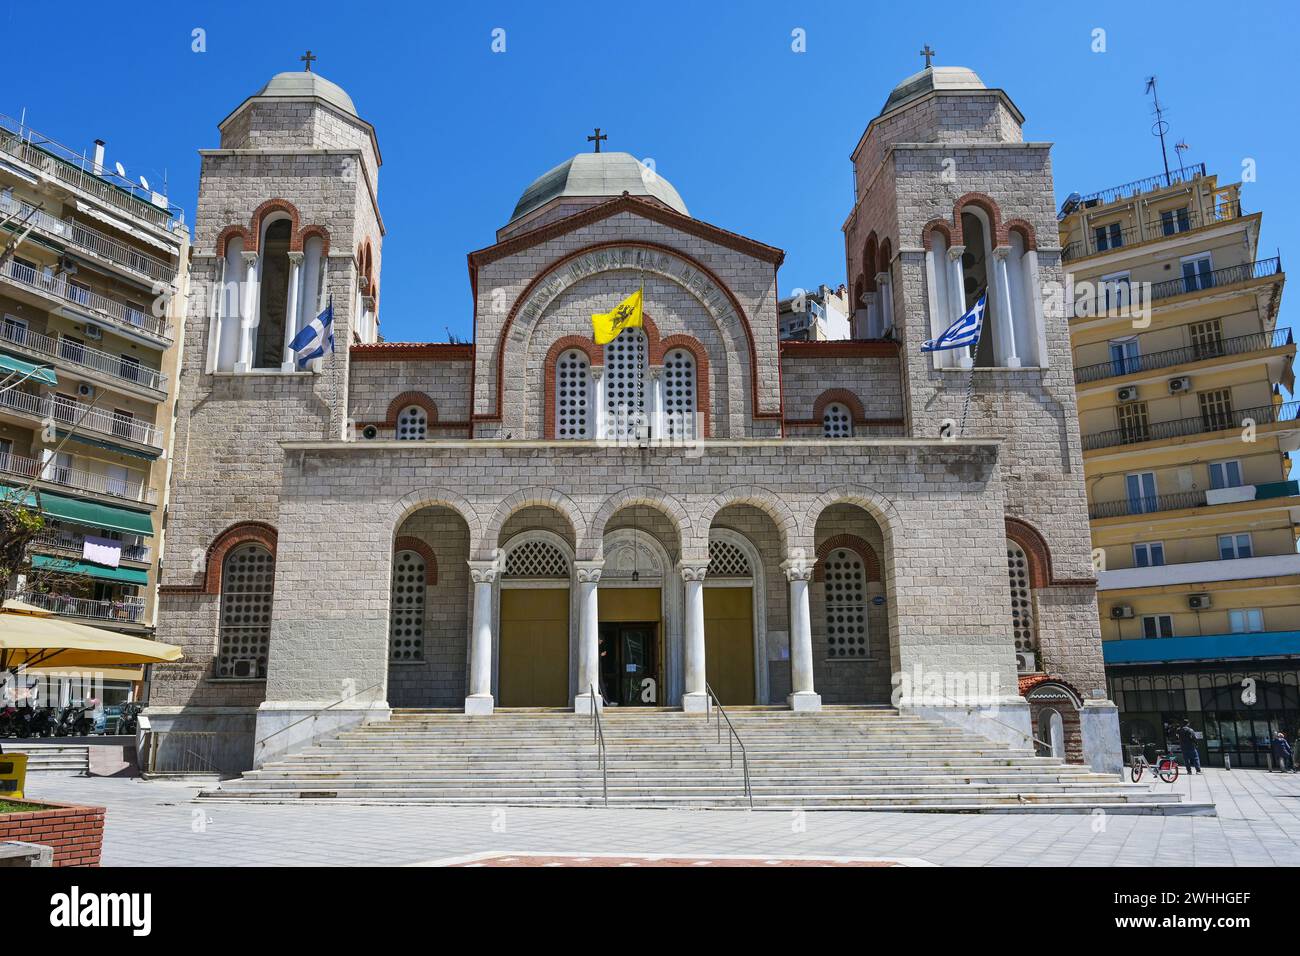 Holy Church of Panagia Dexia (Mother of God) the orthodox church in neo Byzantine style was built in 1956 in the city center of Stock Photo